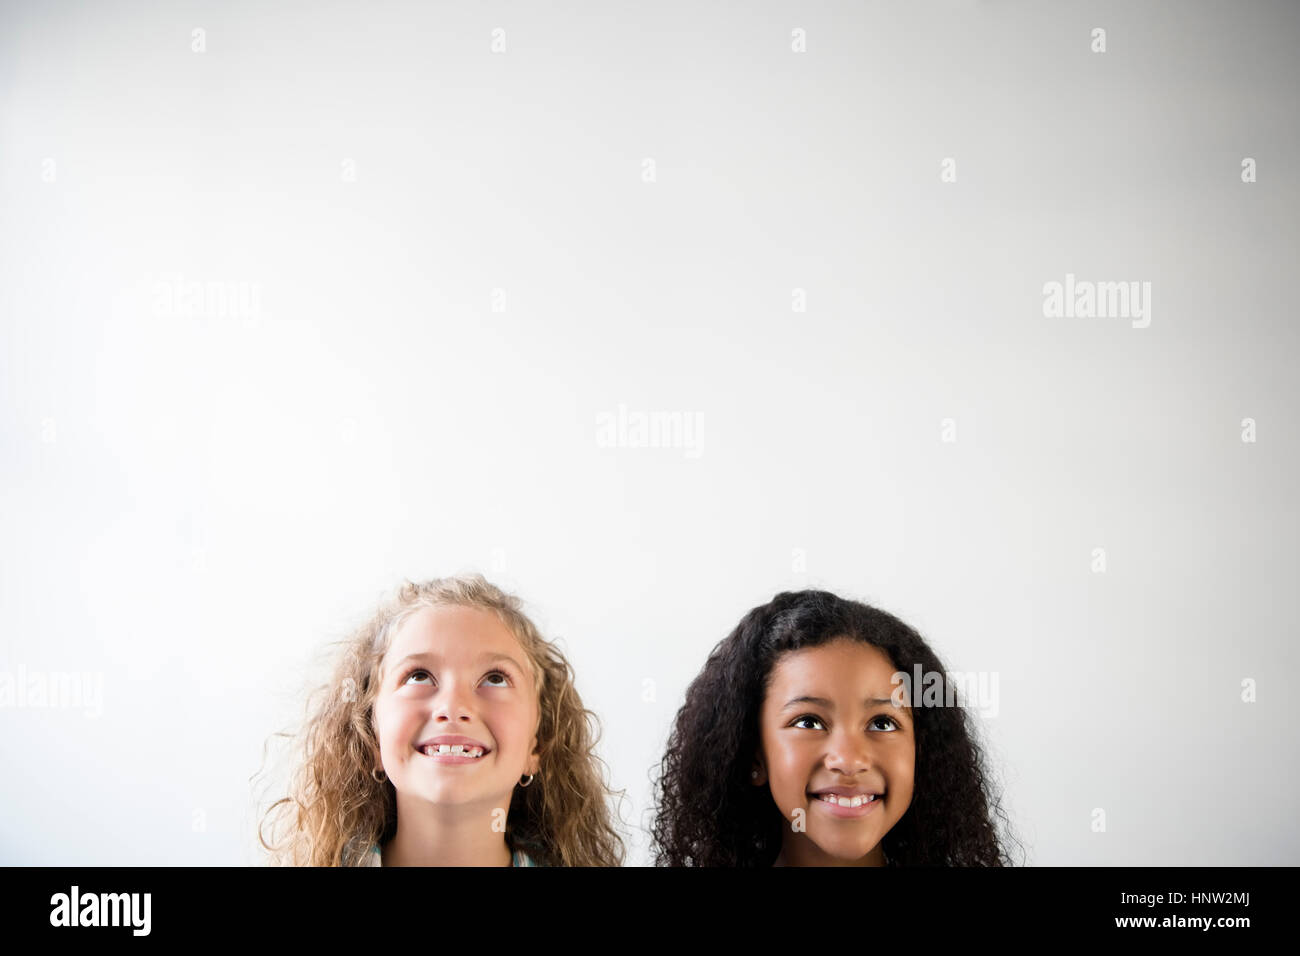 Faces of smiling girls looking up Stock Photo